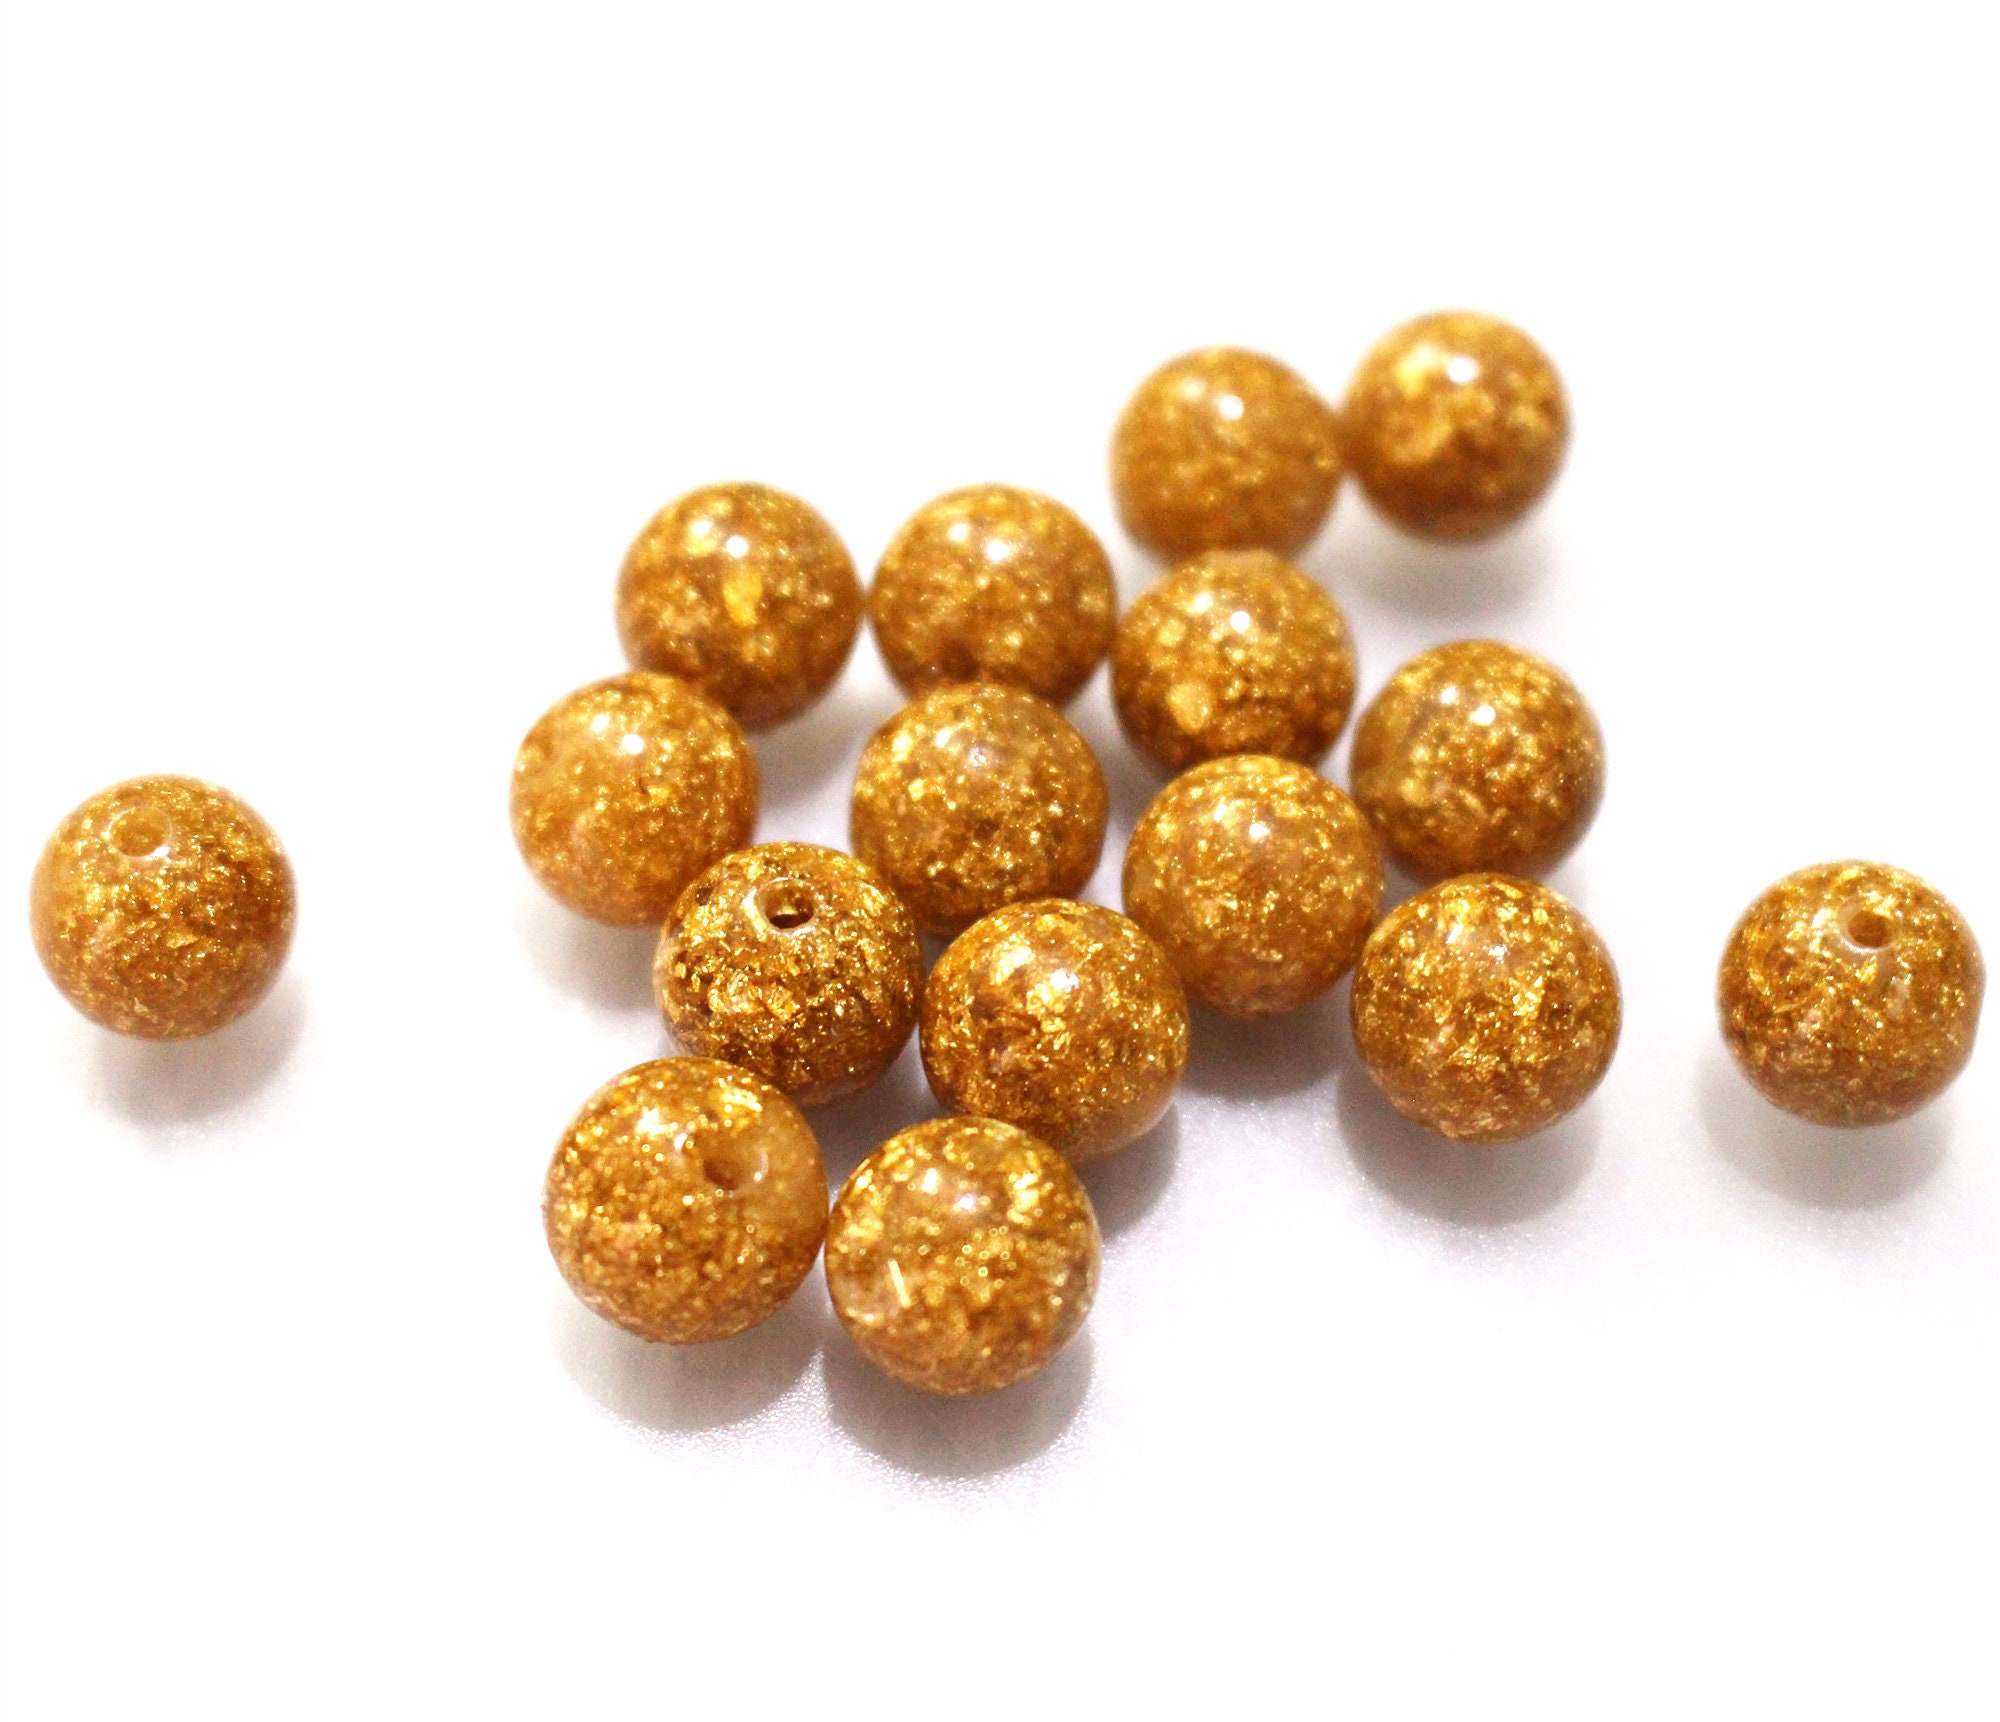 Tiny Gold Beads, Gold Spacer Beads, Mini Ball Beads, Round Beads, Gold  Plated Beads, Jewelry Spacers, Spacer Beads, Gold Tube Beads, 25Pc